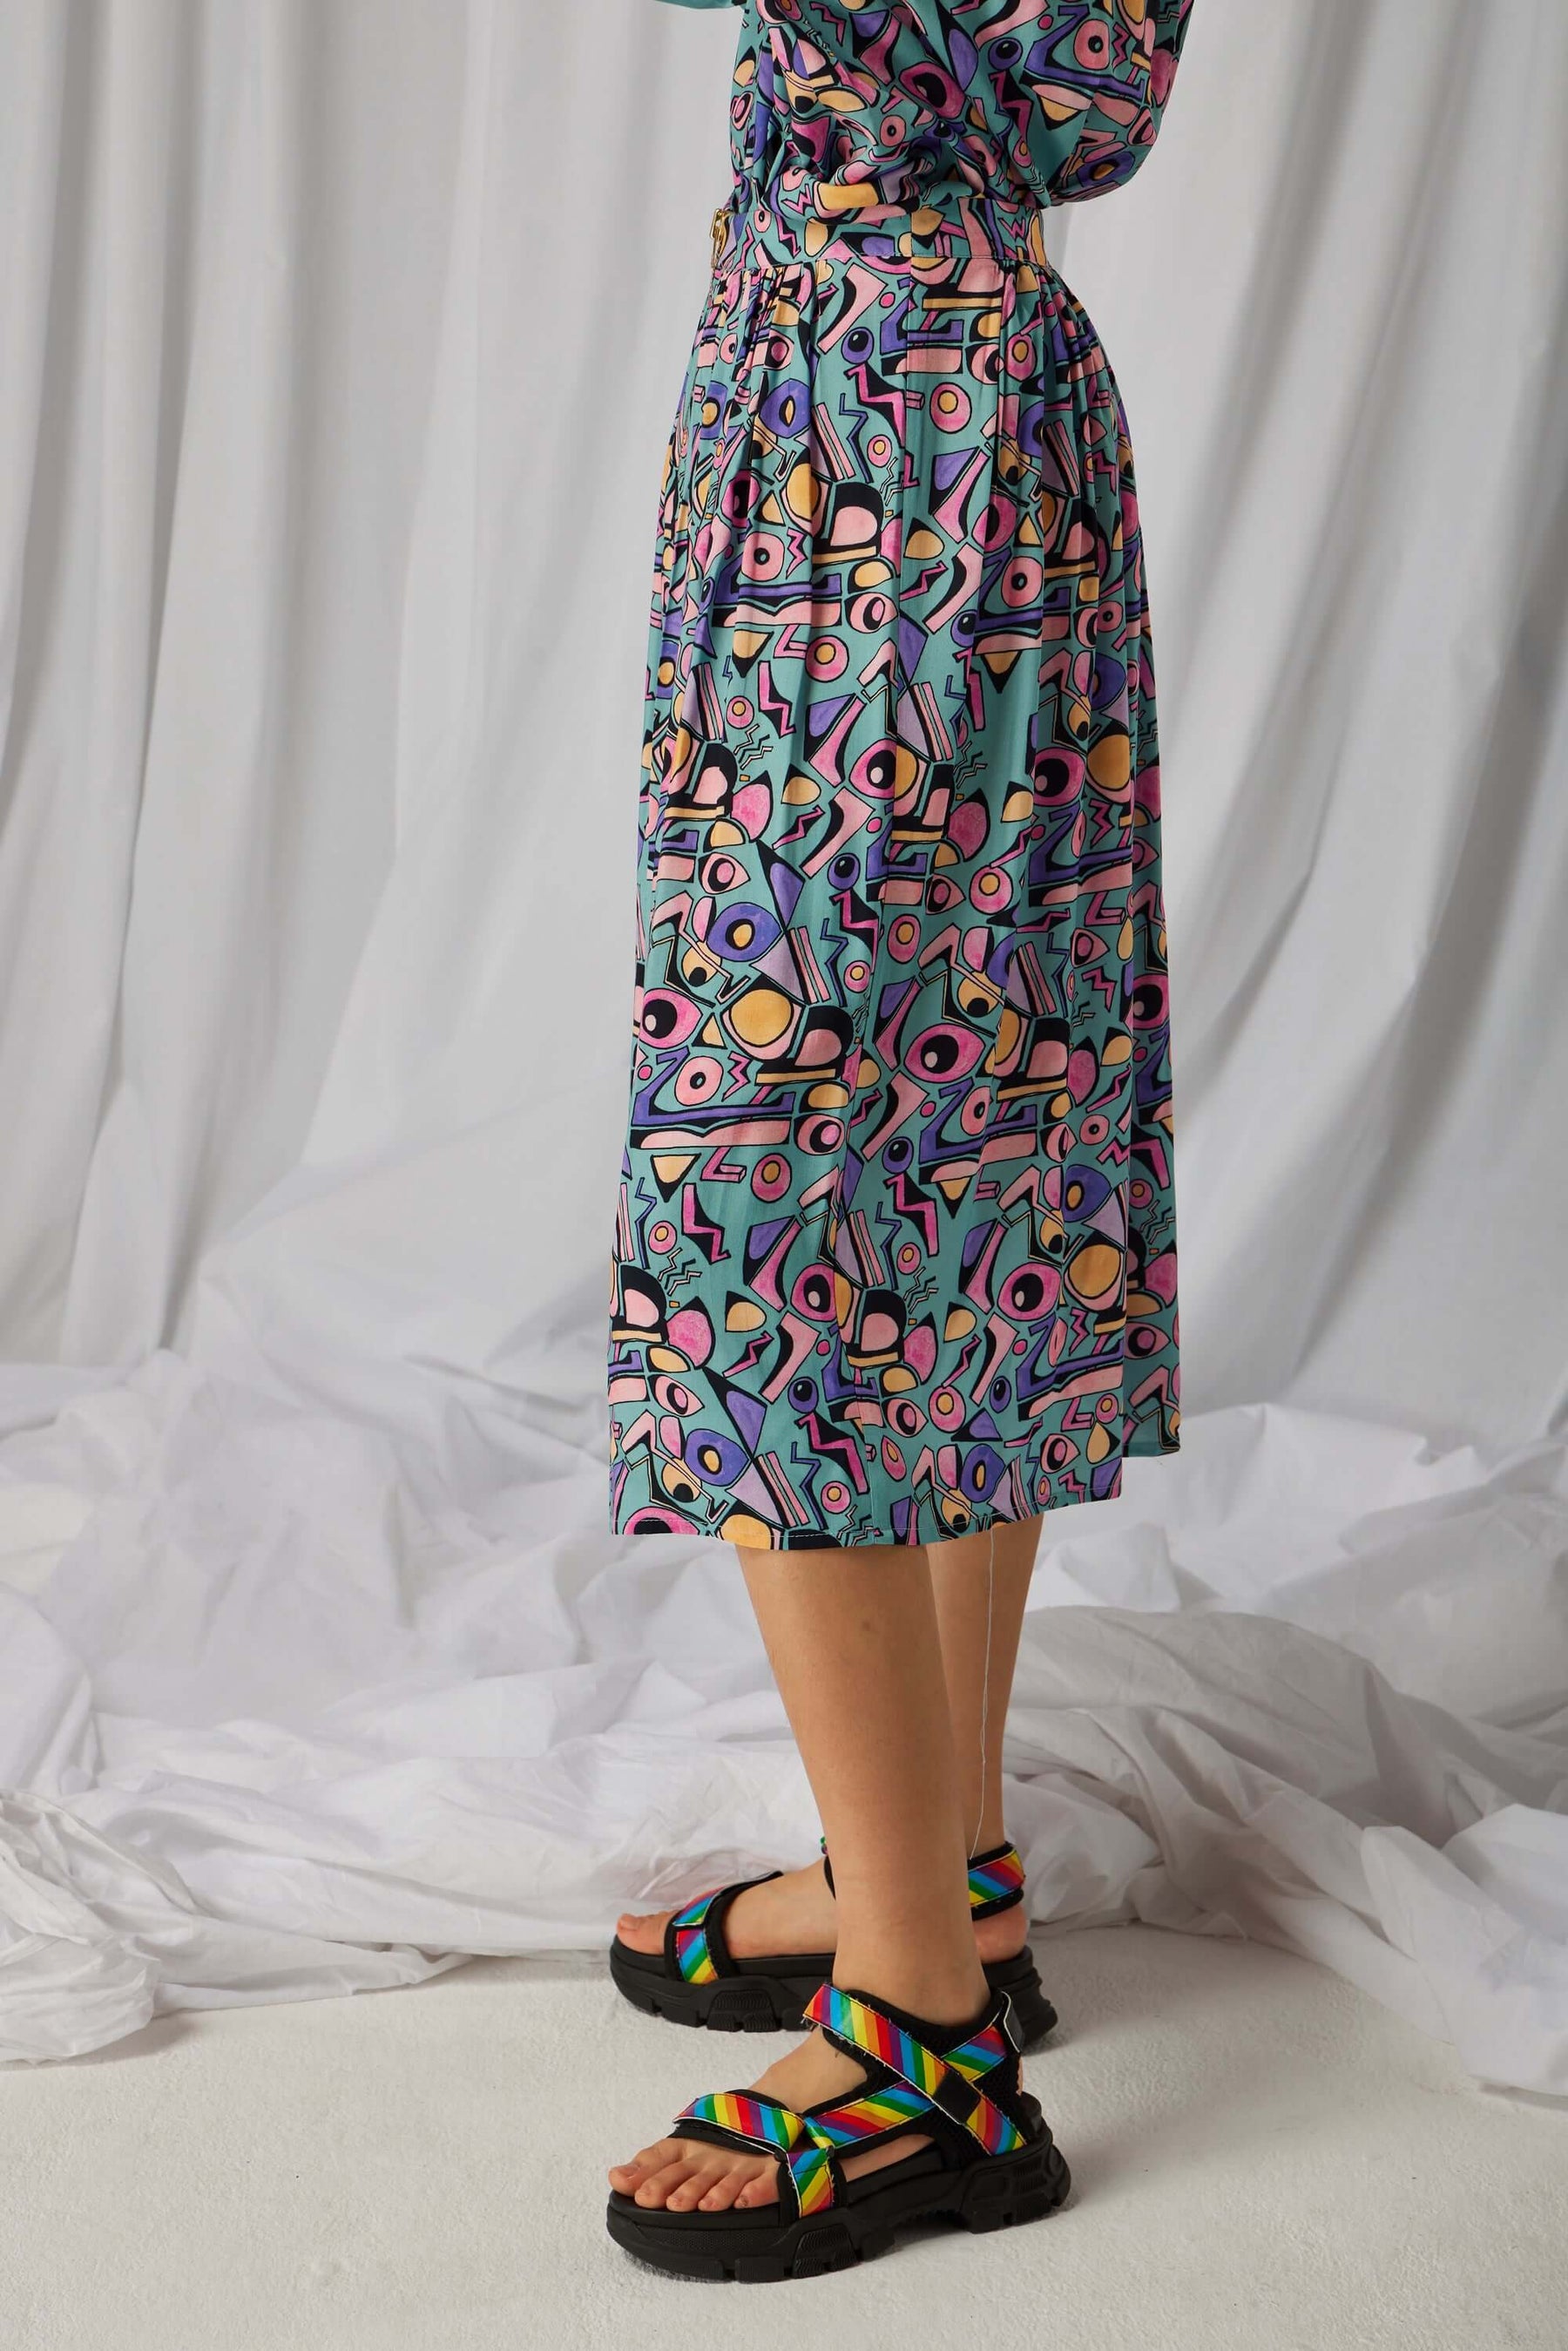 Orso skirt in Miami Factory print